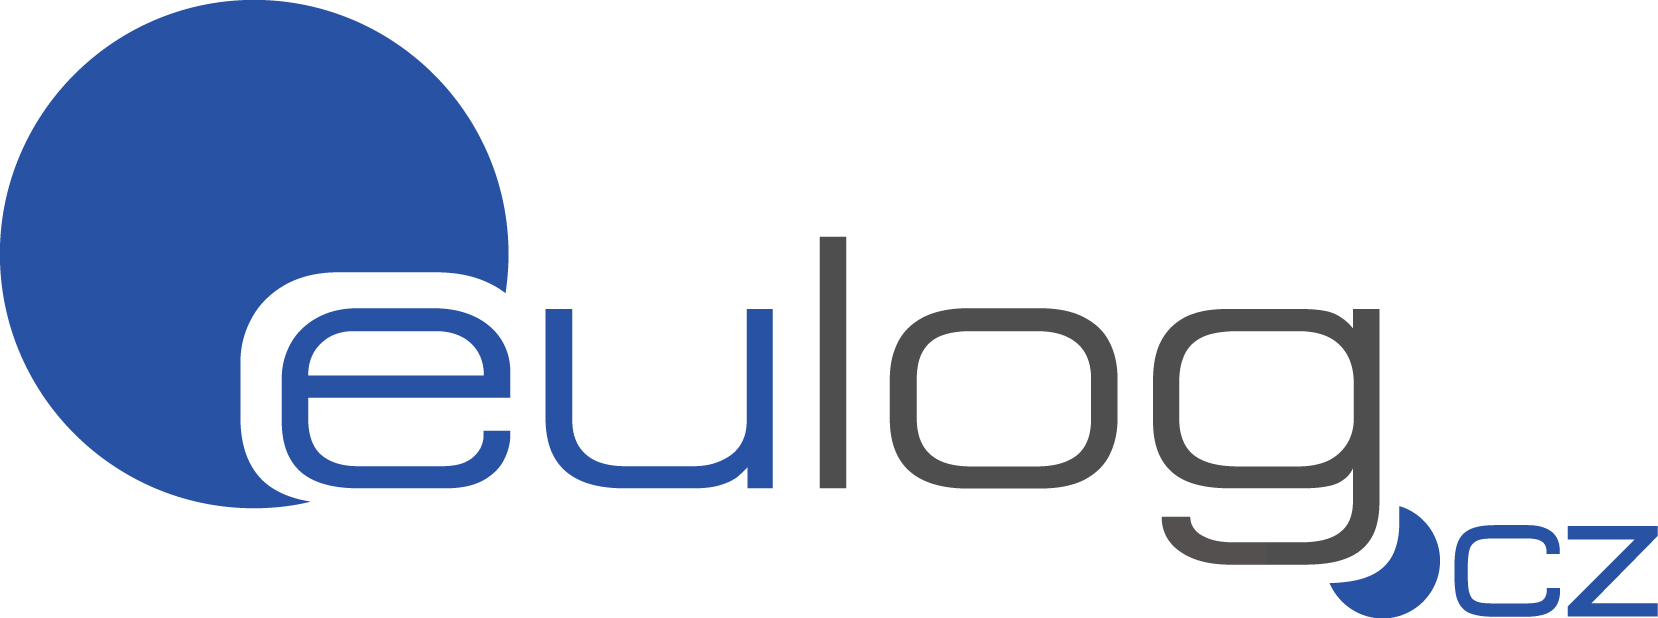 Eulog is the partner of The TECHNOLOGY.FUTURE 2016!